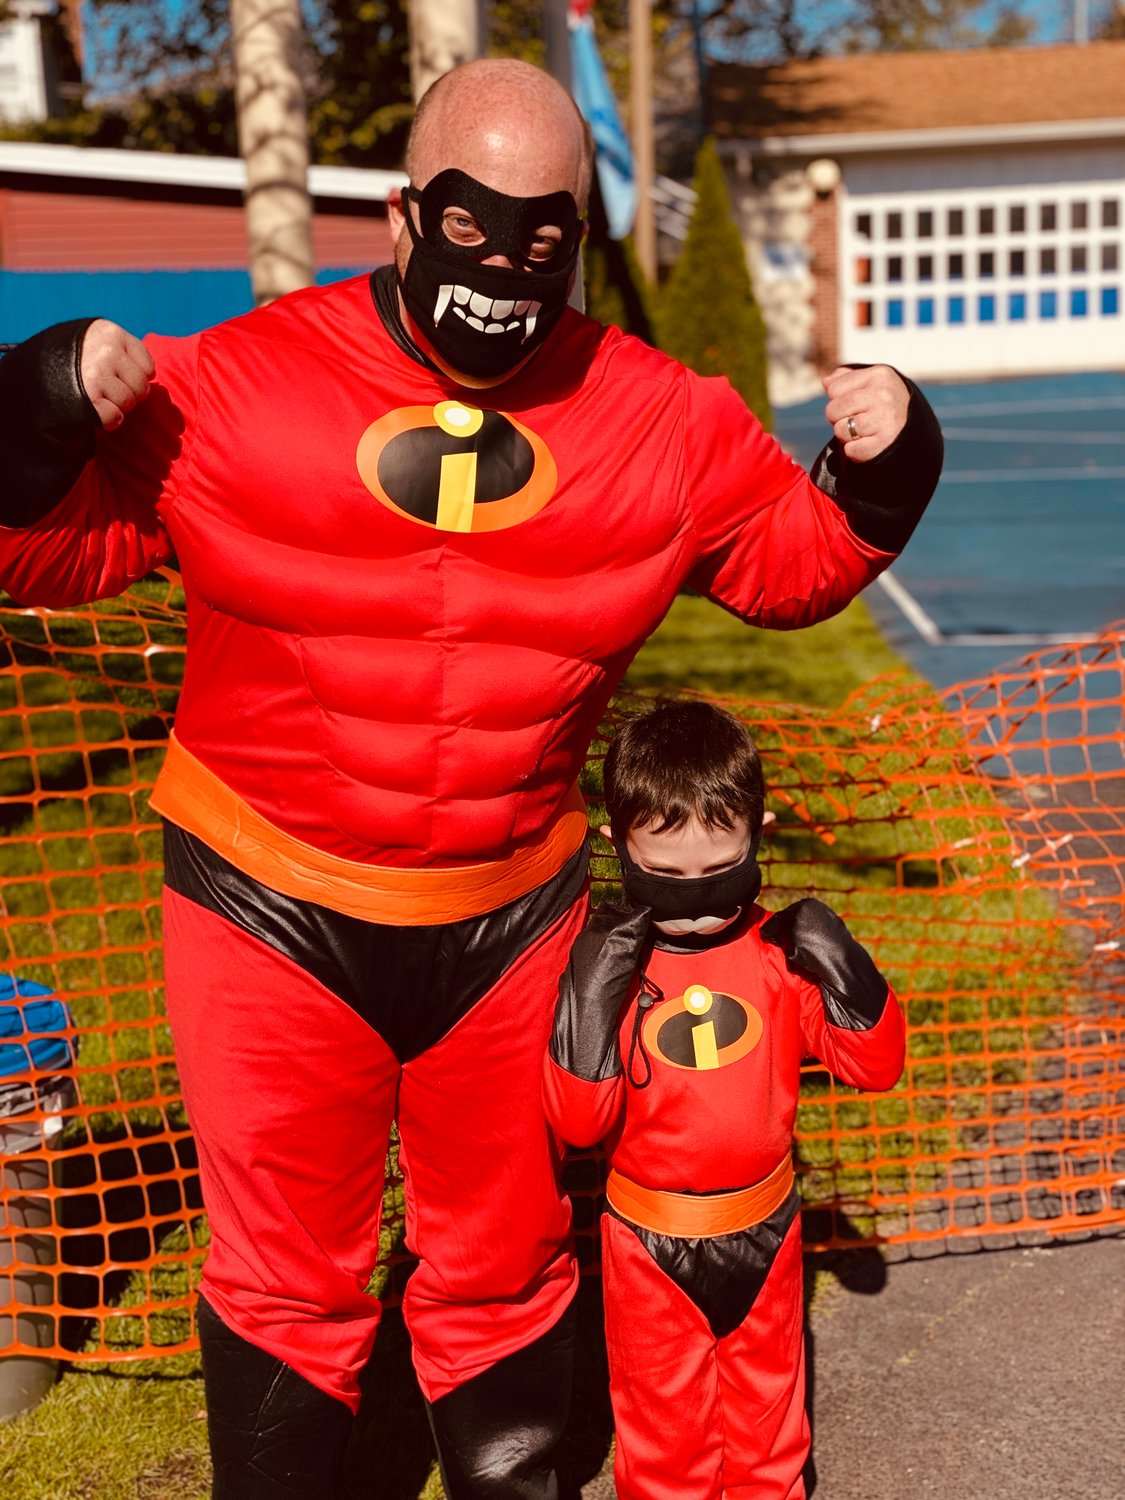 Dad Walter Leupp and his son Sean Leupp came prepared with matching costumes.